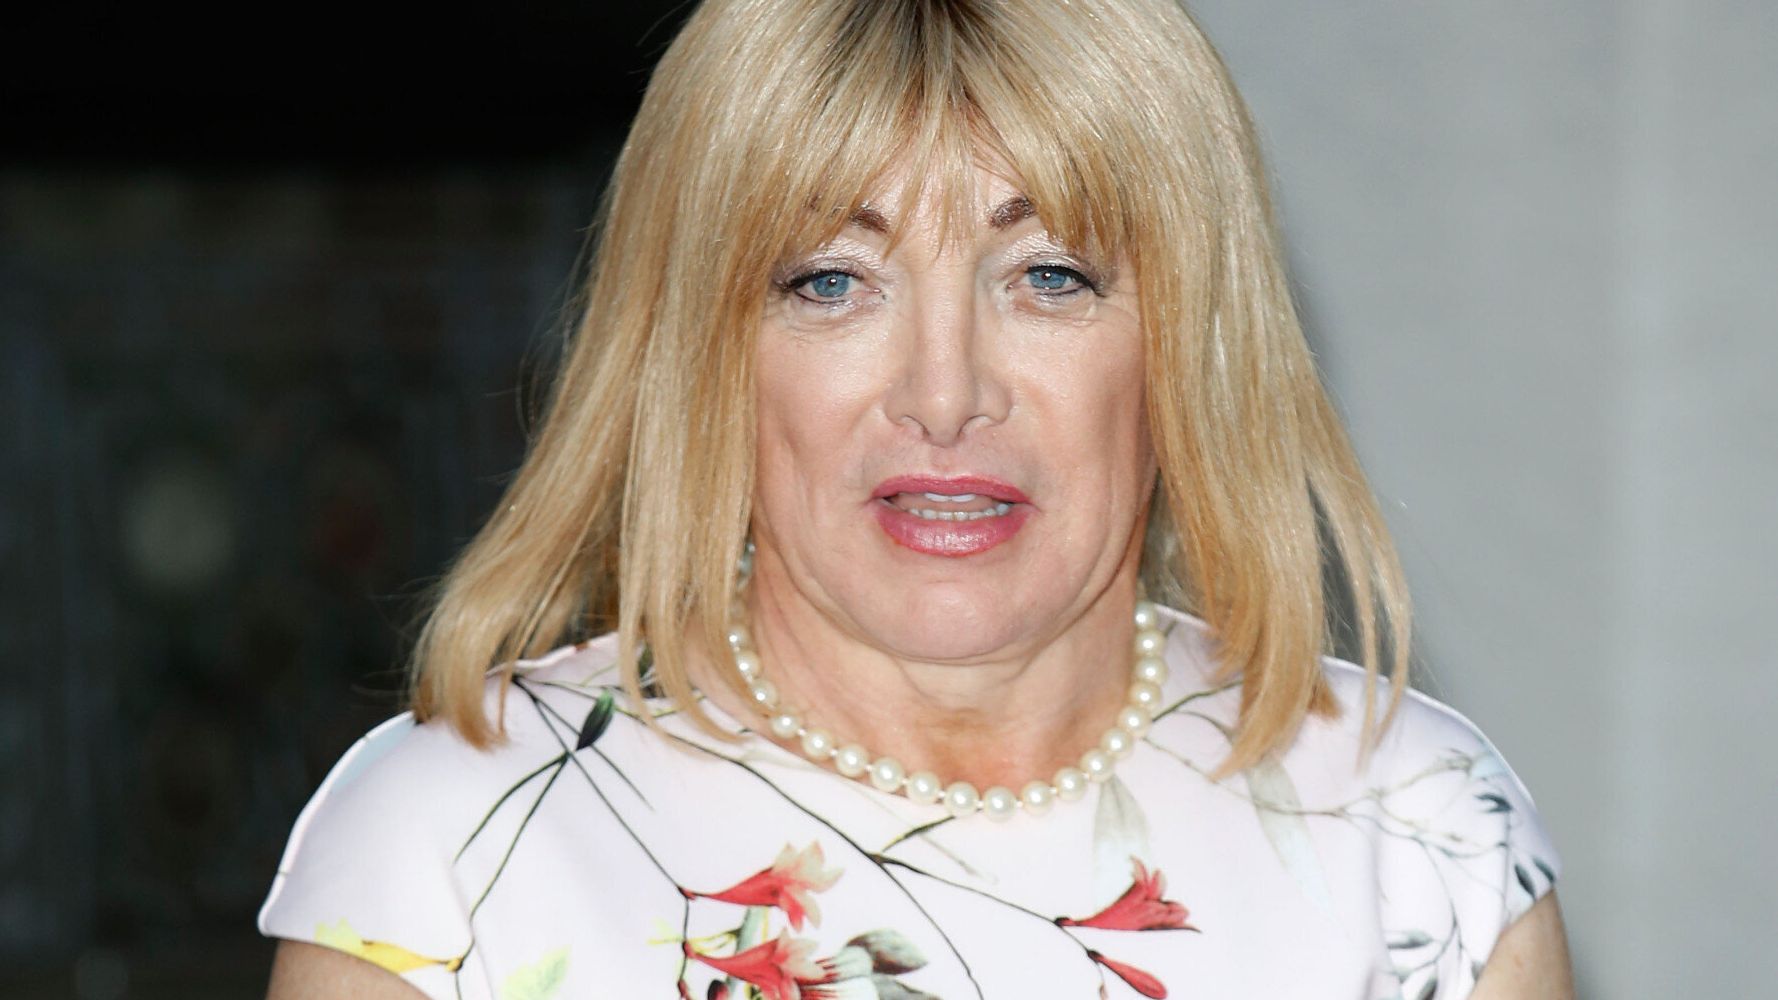 Kellie Maloney Reveals Gender Reassignment Surgery Will Go Ahead After 